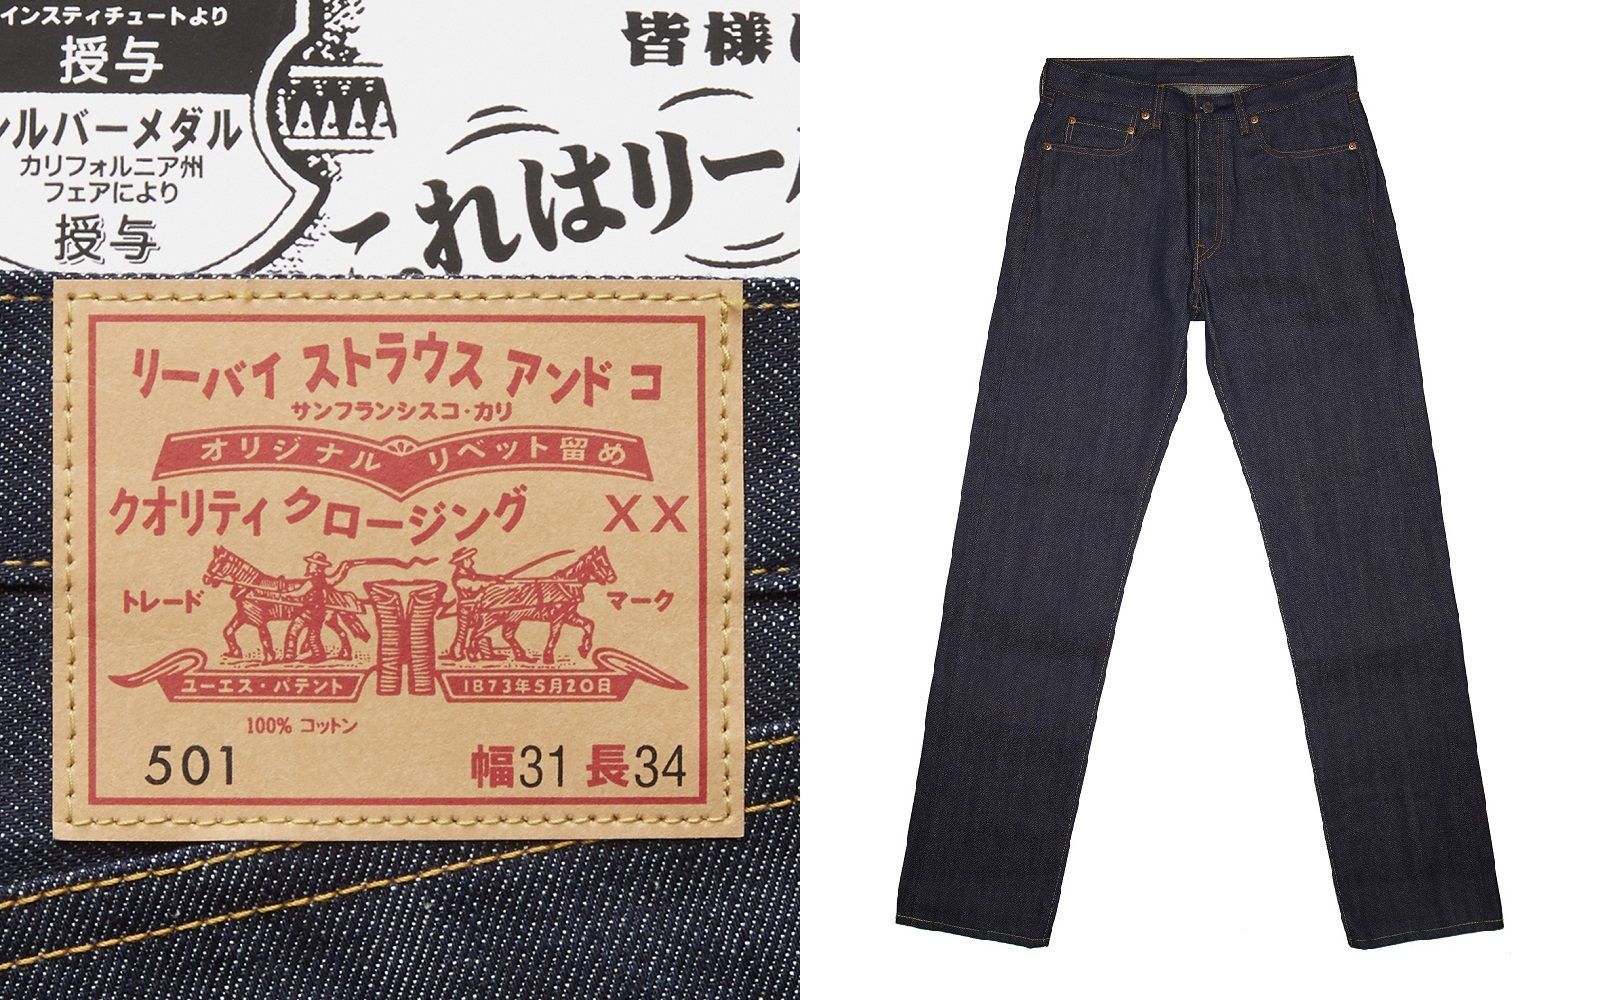 LEVI'S 501 LIMITED EDITION FOR JAPAN 